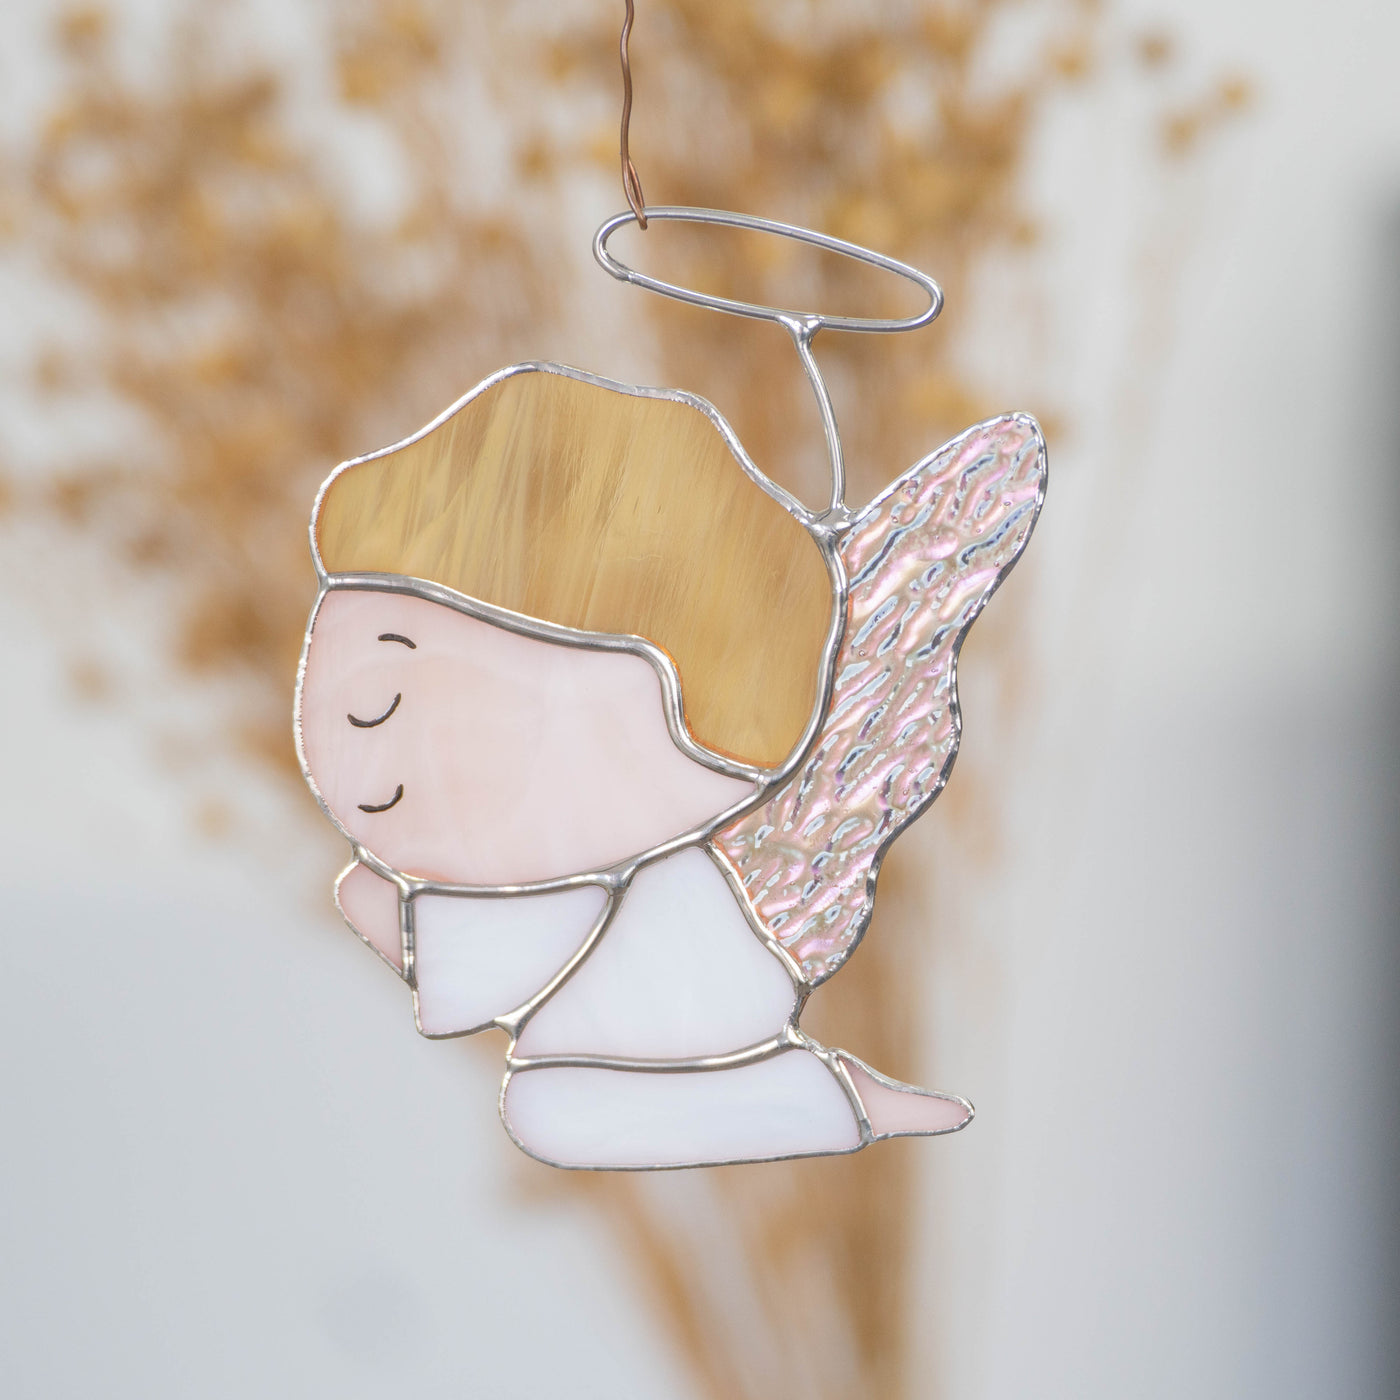 Praying on knees stained glass angel boy window hanging